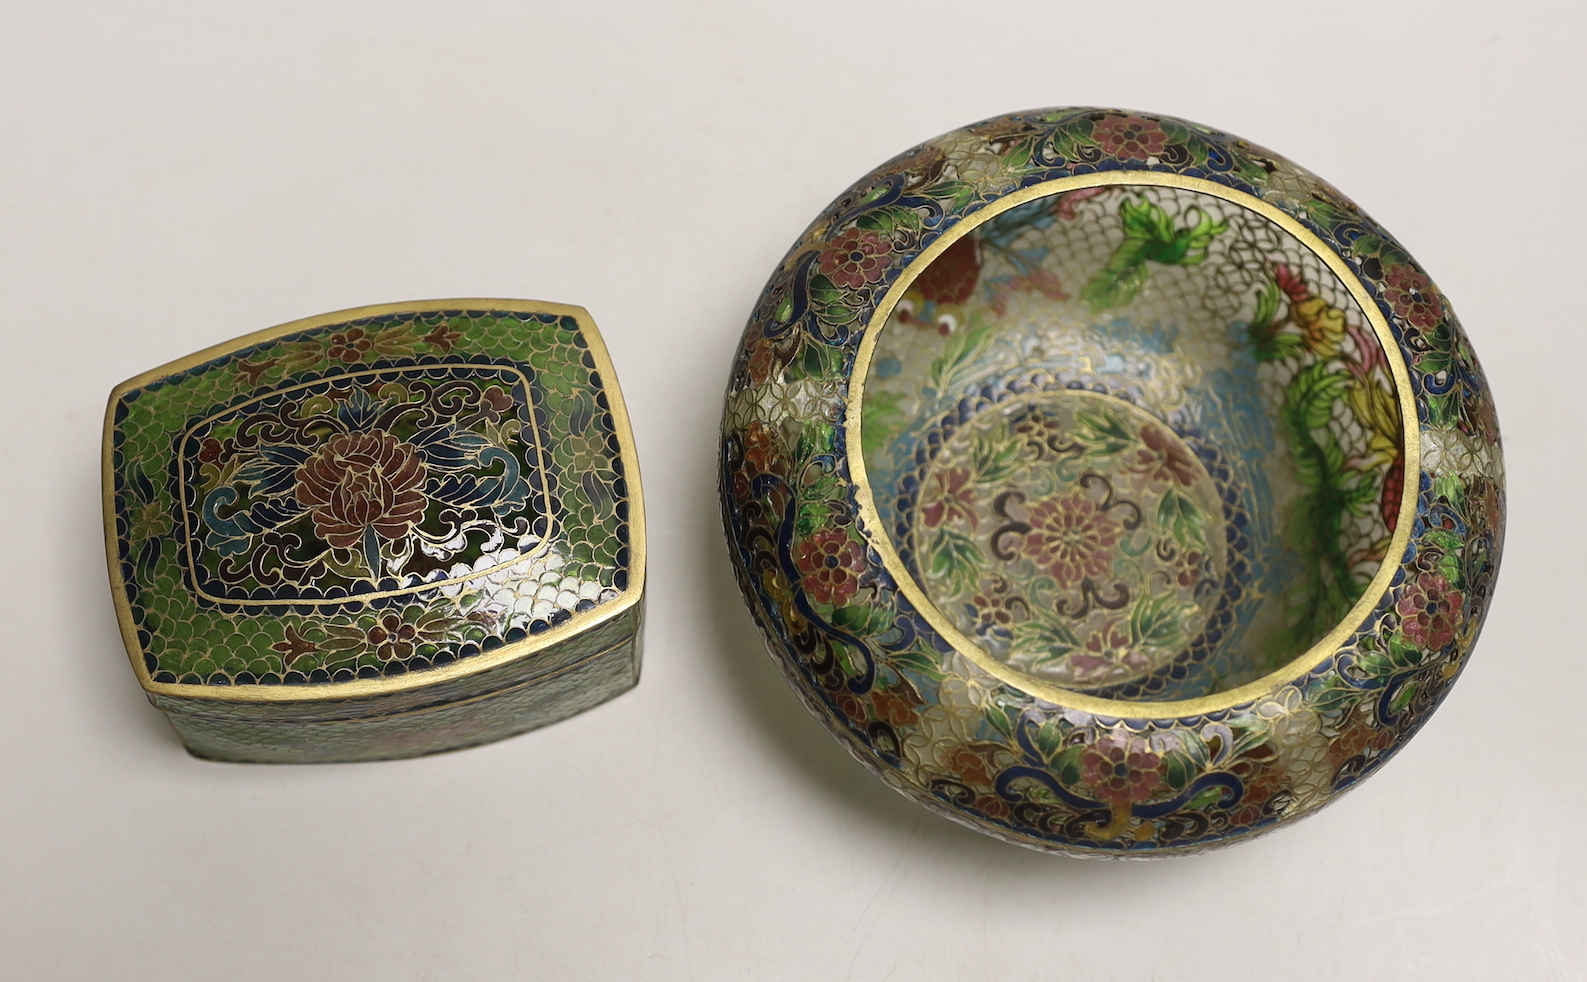 A Chinese plique à jour enamel bowl, 7cm tall, and a similar box and cover